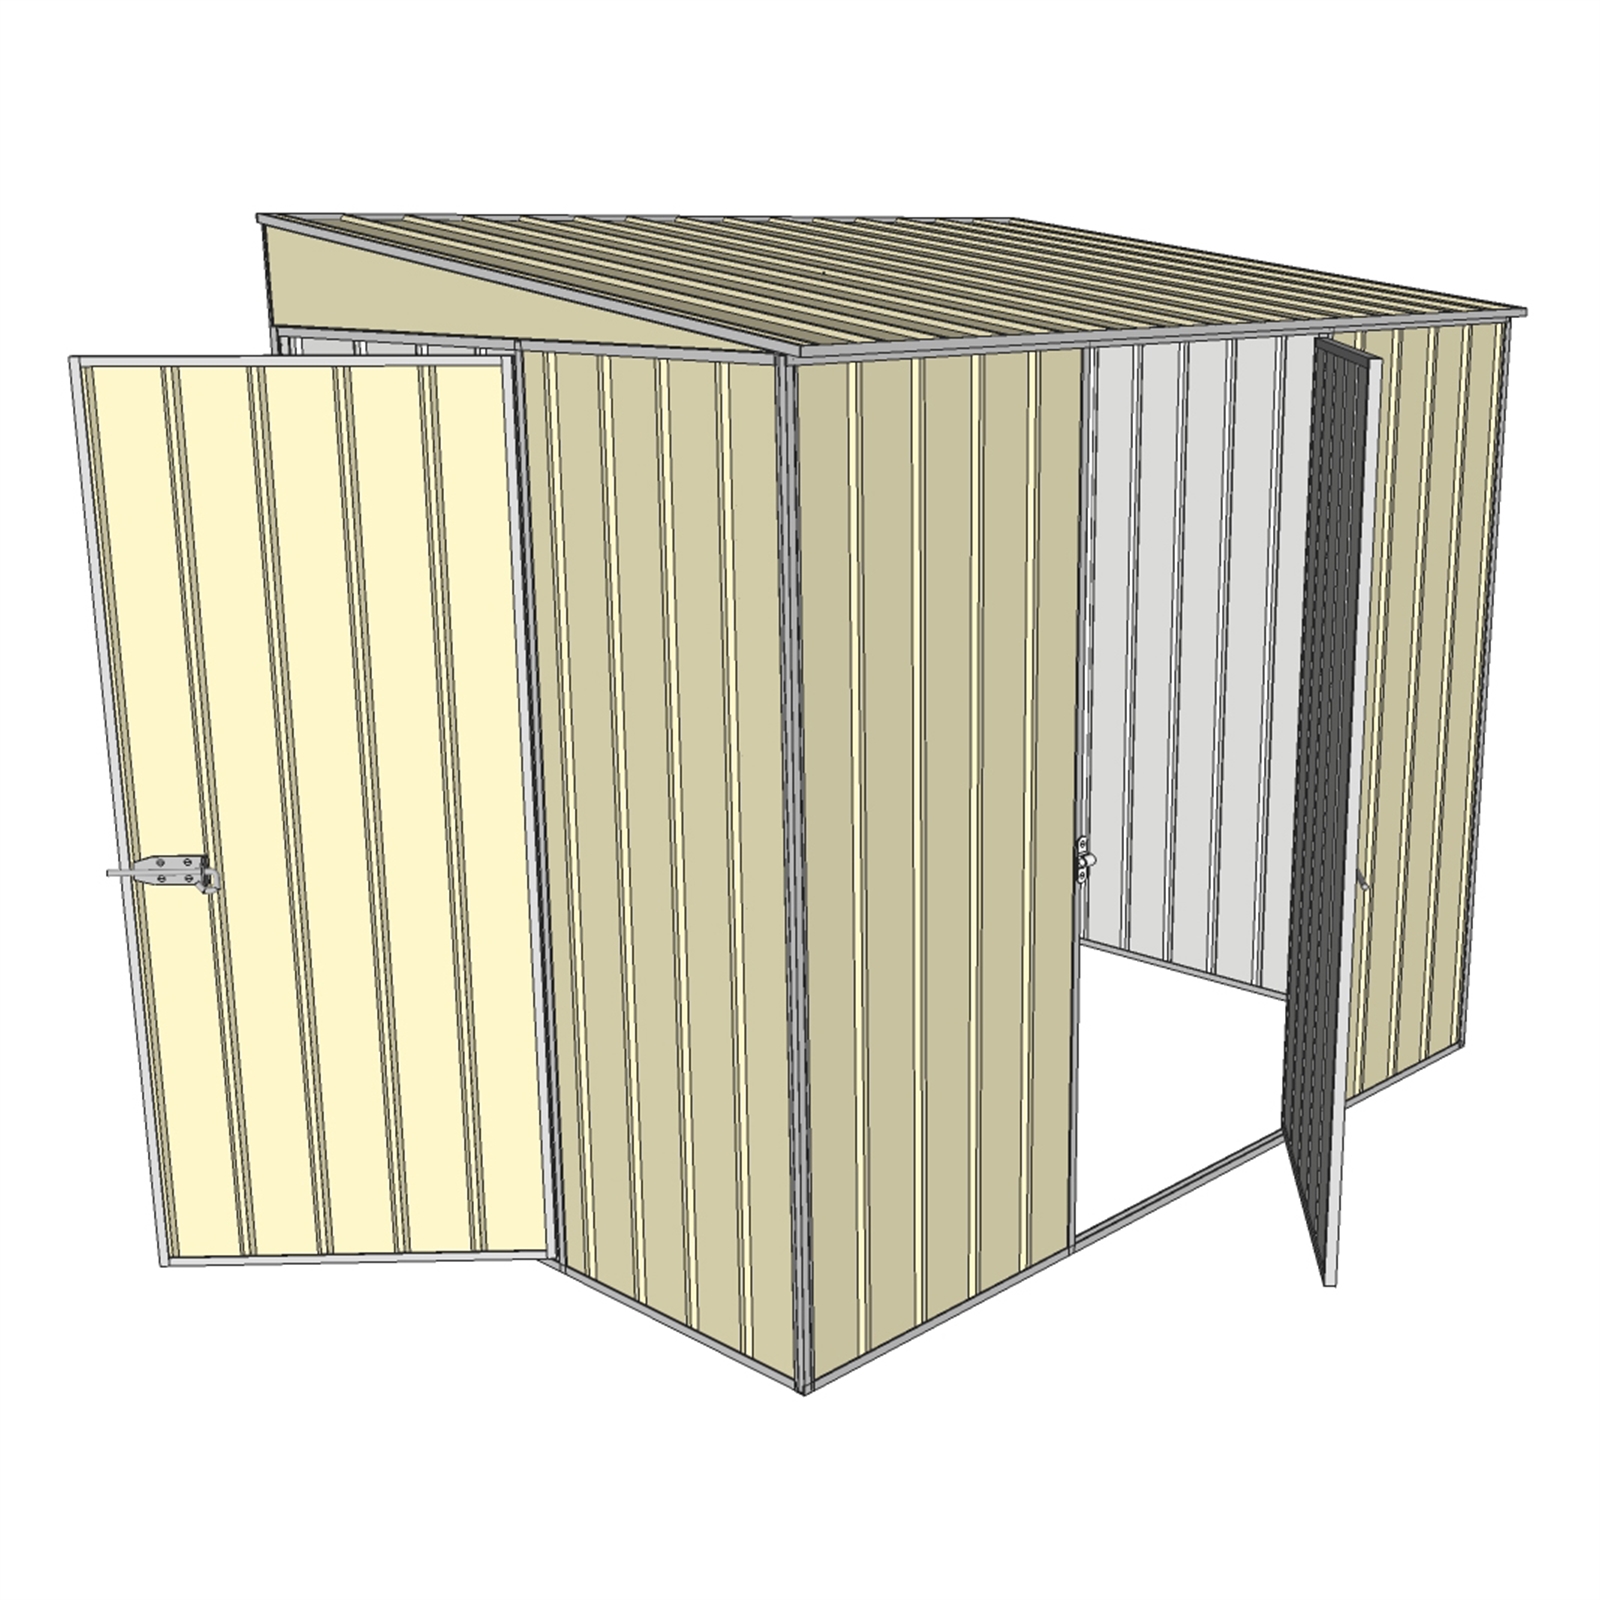 Build-a-Shed 2.3 x 1.5 x 2.0m Cream Skillion Two Single Hinged Doors Narrow Shed